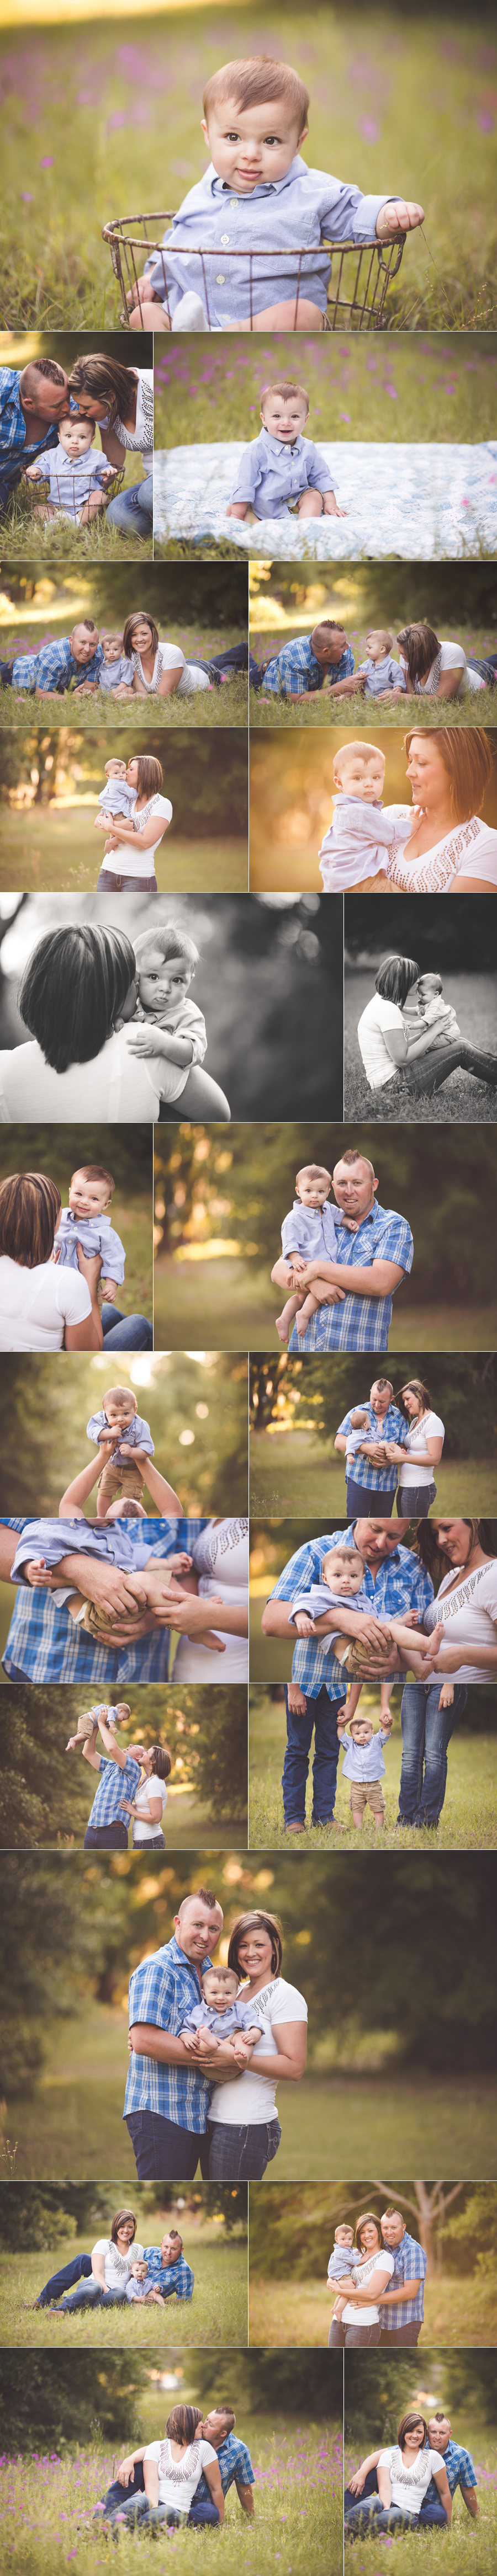 Orlando family photographer session 6 month old